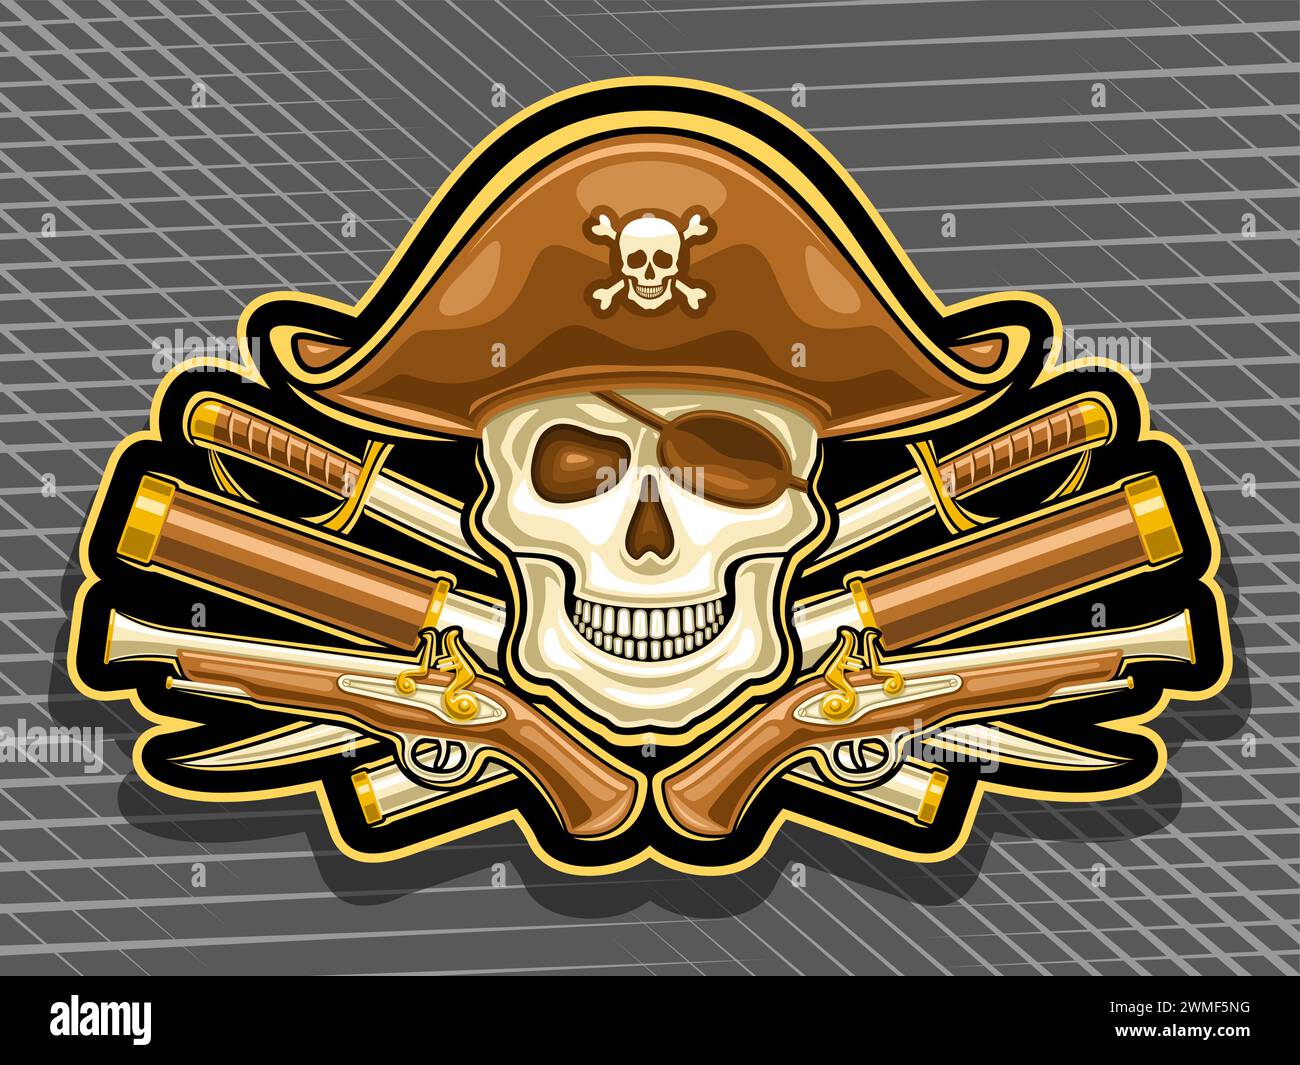 Vector logo for Pirate Skull, horizontal poster with illustration of smiling skull in sea hat and pirate eyepatch, decorative crest with art design pi Stock Vector